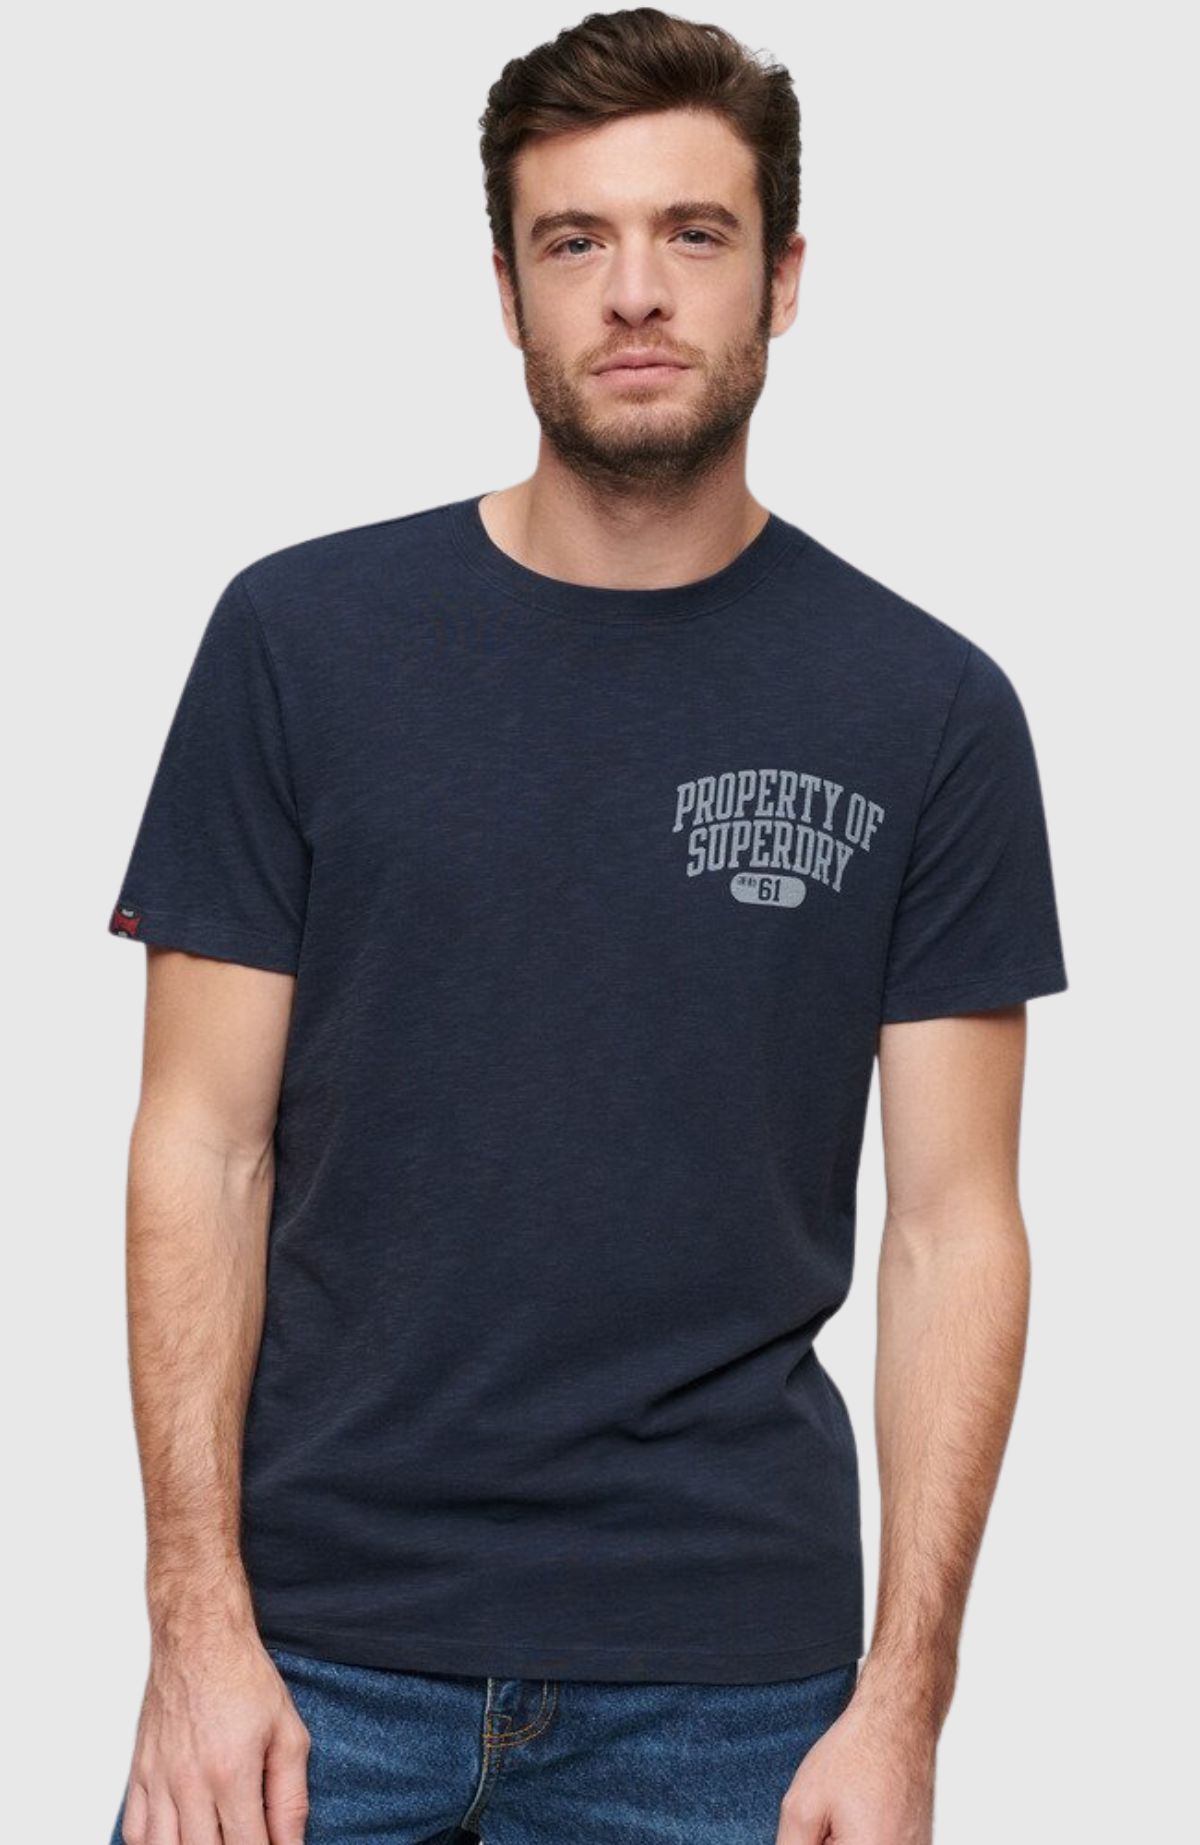 Athletic College Graphic Tee